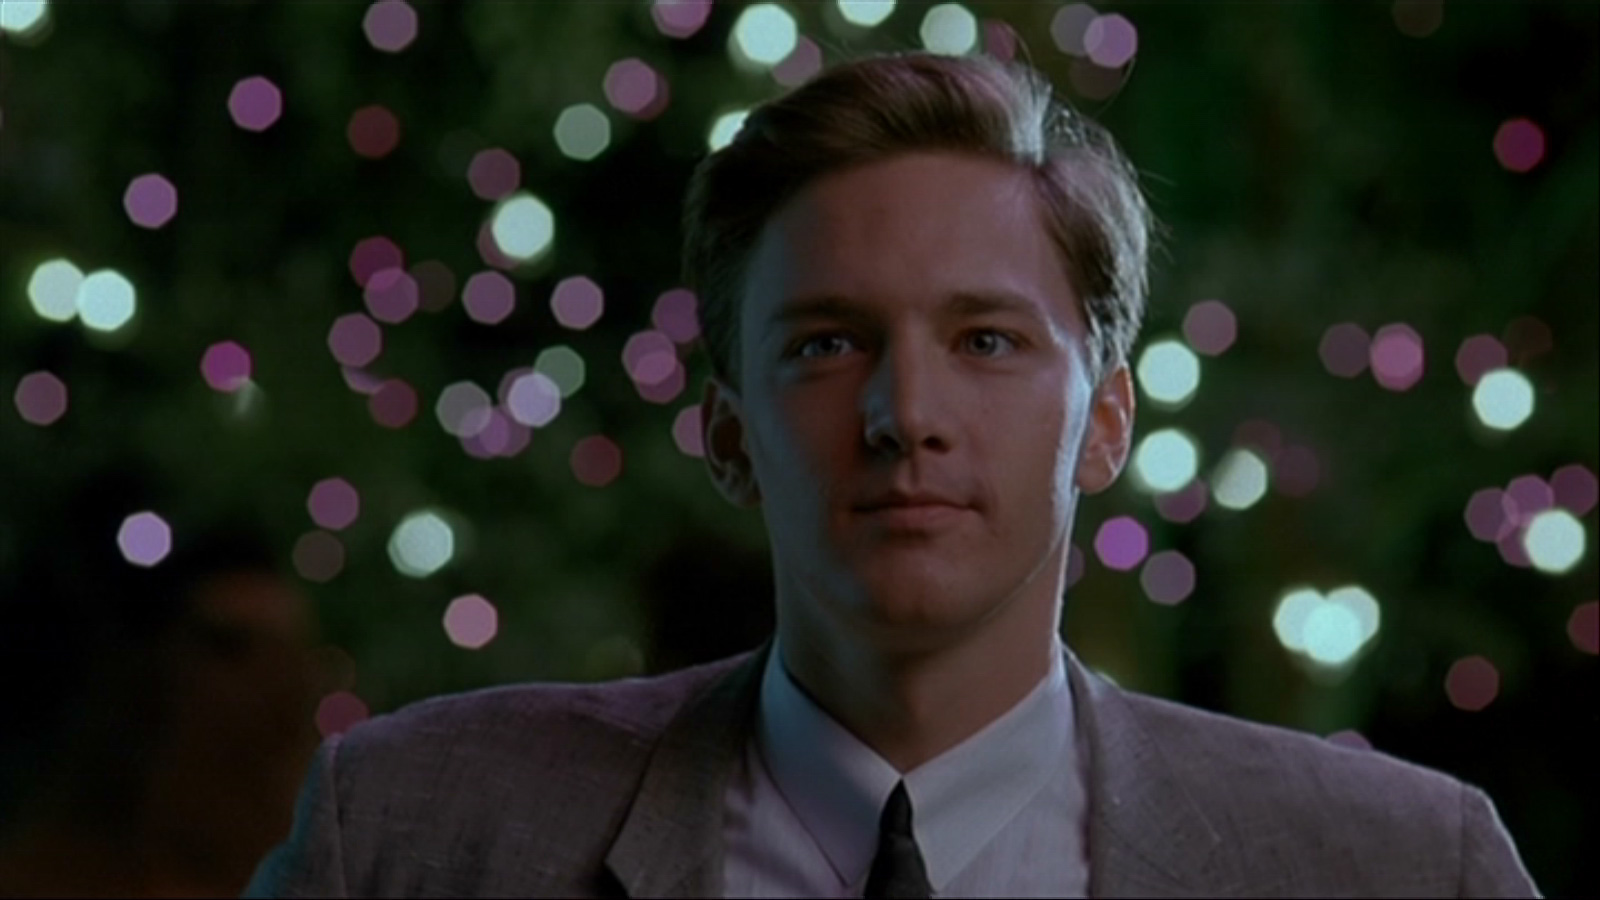 Our #ThrowbackThursday Movie starring Andrew McCarthy.